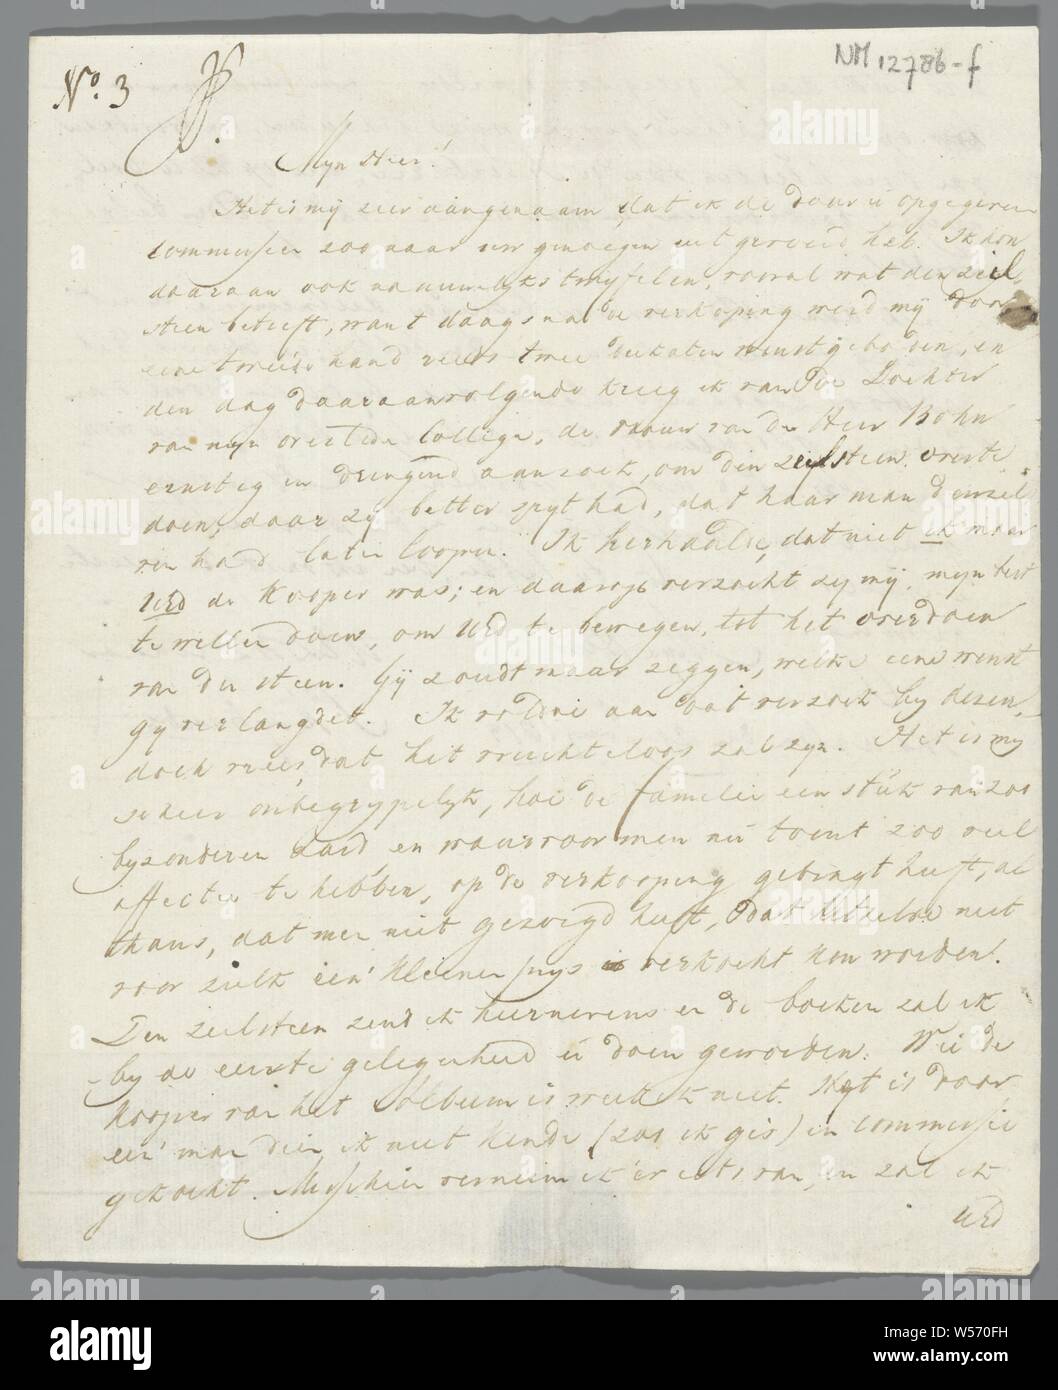 Letter from S. K. Sybrandi to J. Scheltema June 21, 1813, Handwritten letter, was folded and sealed with varnish on which a now illegible stamp, sanded open at the paint. Signed, p.2, r.m .: S. K. Sybrandi. Dated, 1m: Haarlem Den 21 Juny 1813. Marked, watermark: crowned weapon with post horn / D & C BLUE. Inscription, p.1, lb .: No 3 and p.4, m .: Den Heere / J. Scheltema / Vrederegter / te / Zaandam / with / a package, Zaandam, Peter I the Great (Tsar of Russia), S. K. Sybrandi, Haarlem, 21-Jun-1813, paper, lacquer (coating), ink, l 22.8 cm × w 18.9 cm Stock Photo